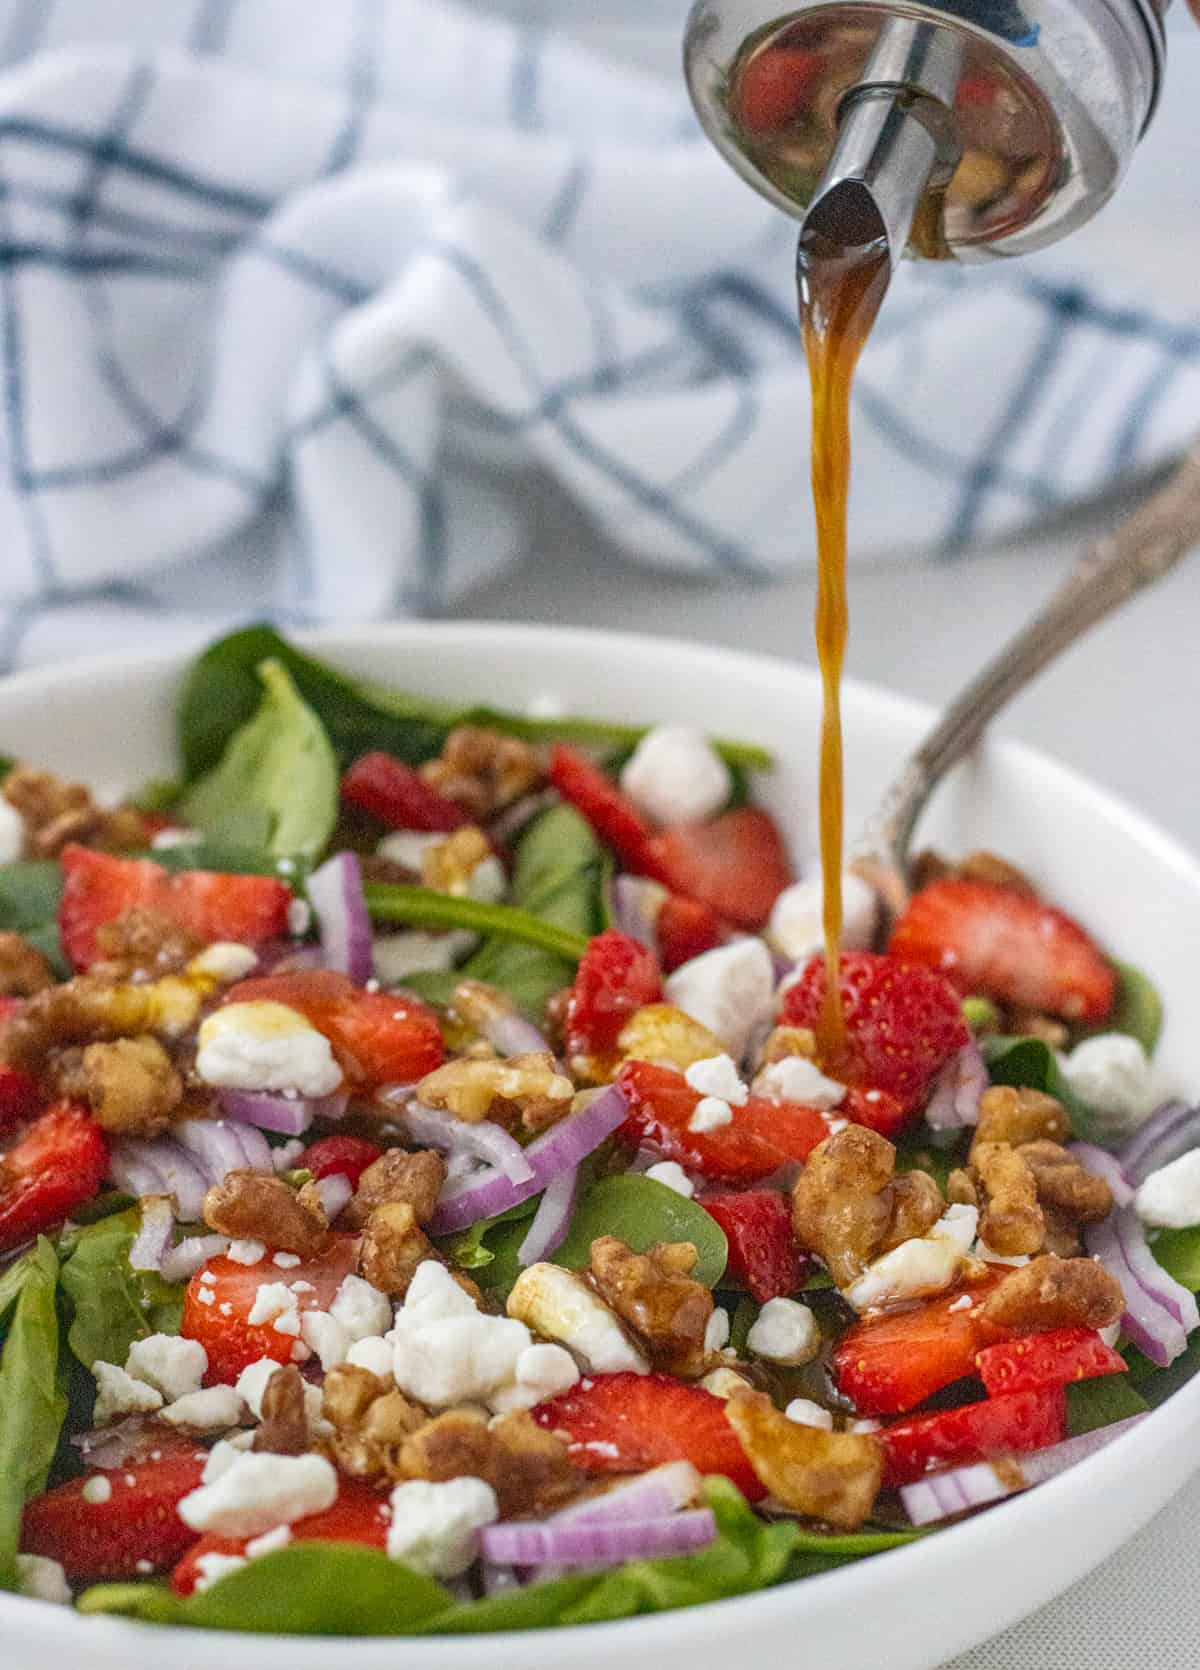 Strawberry goat cheese salad with balsamic dressing being drizzled over it.